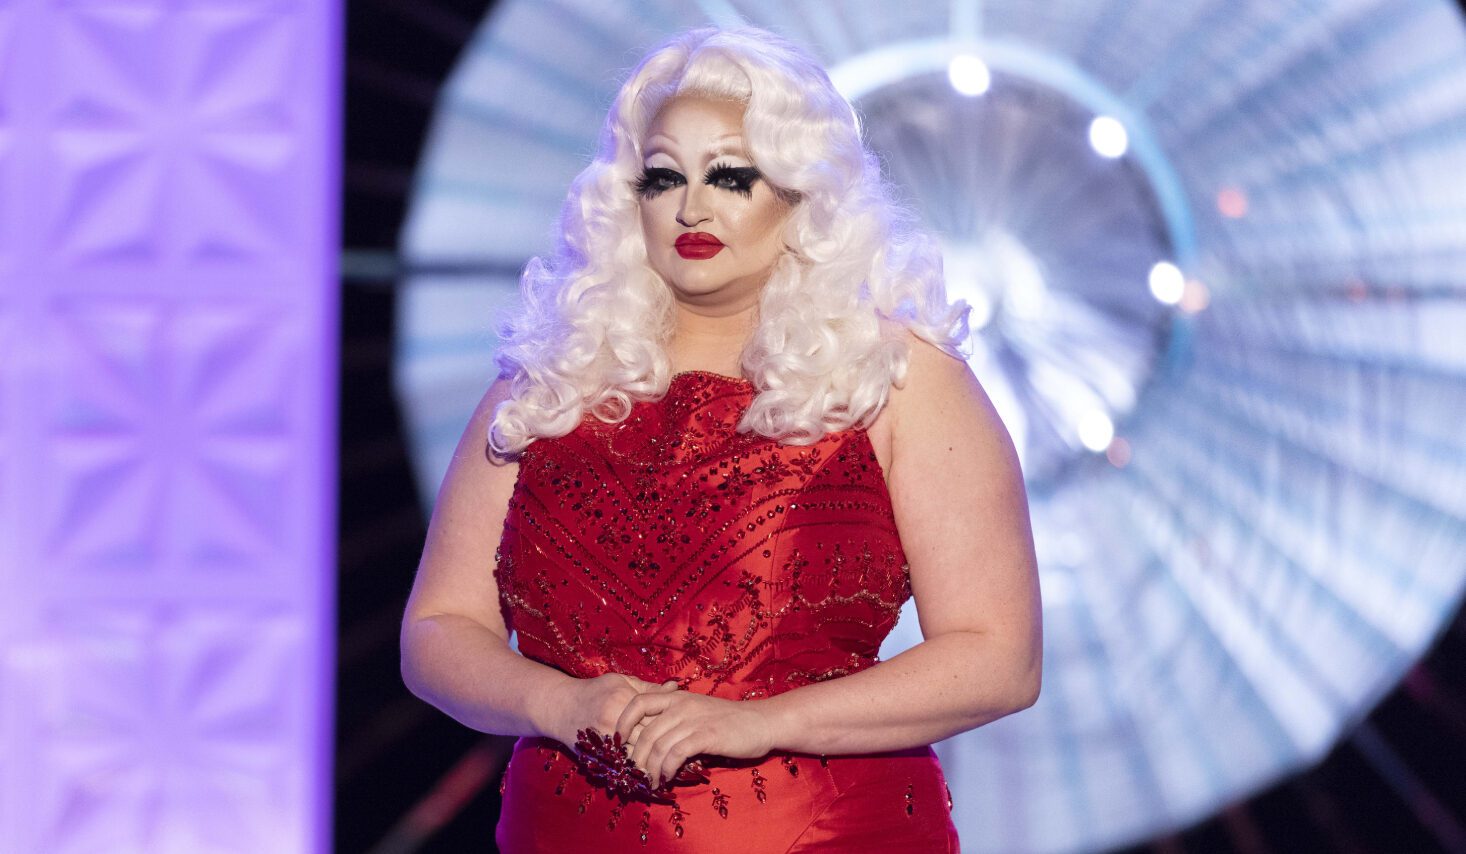 Exclusive: Victoria Scone has 'not received an invitation' for Drag Race UK  season 4